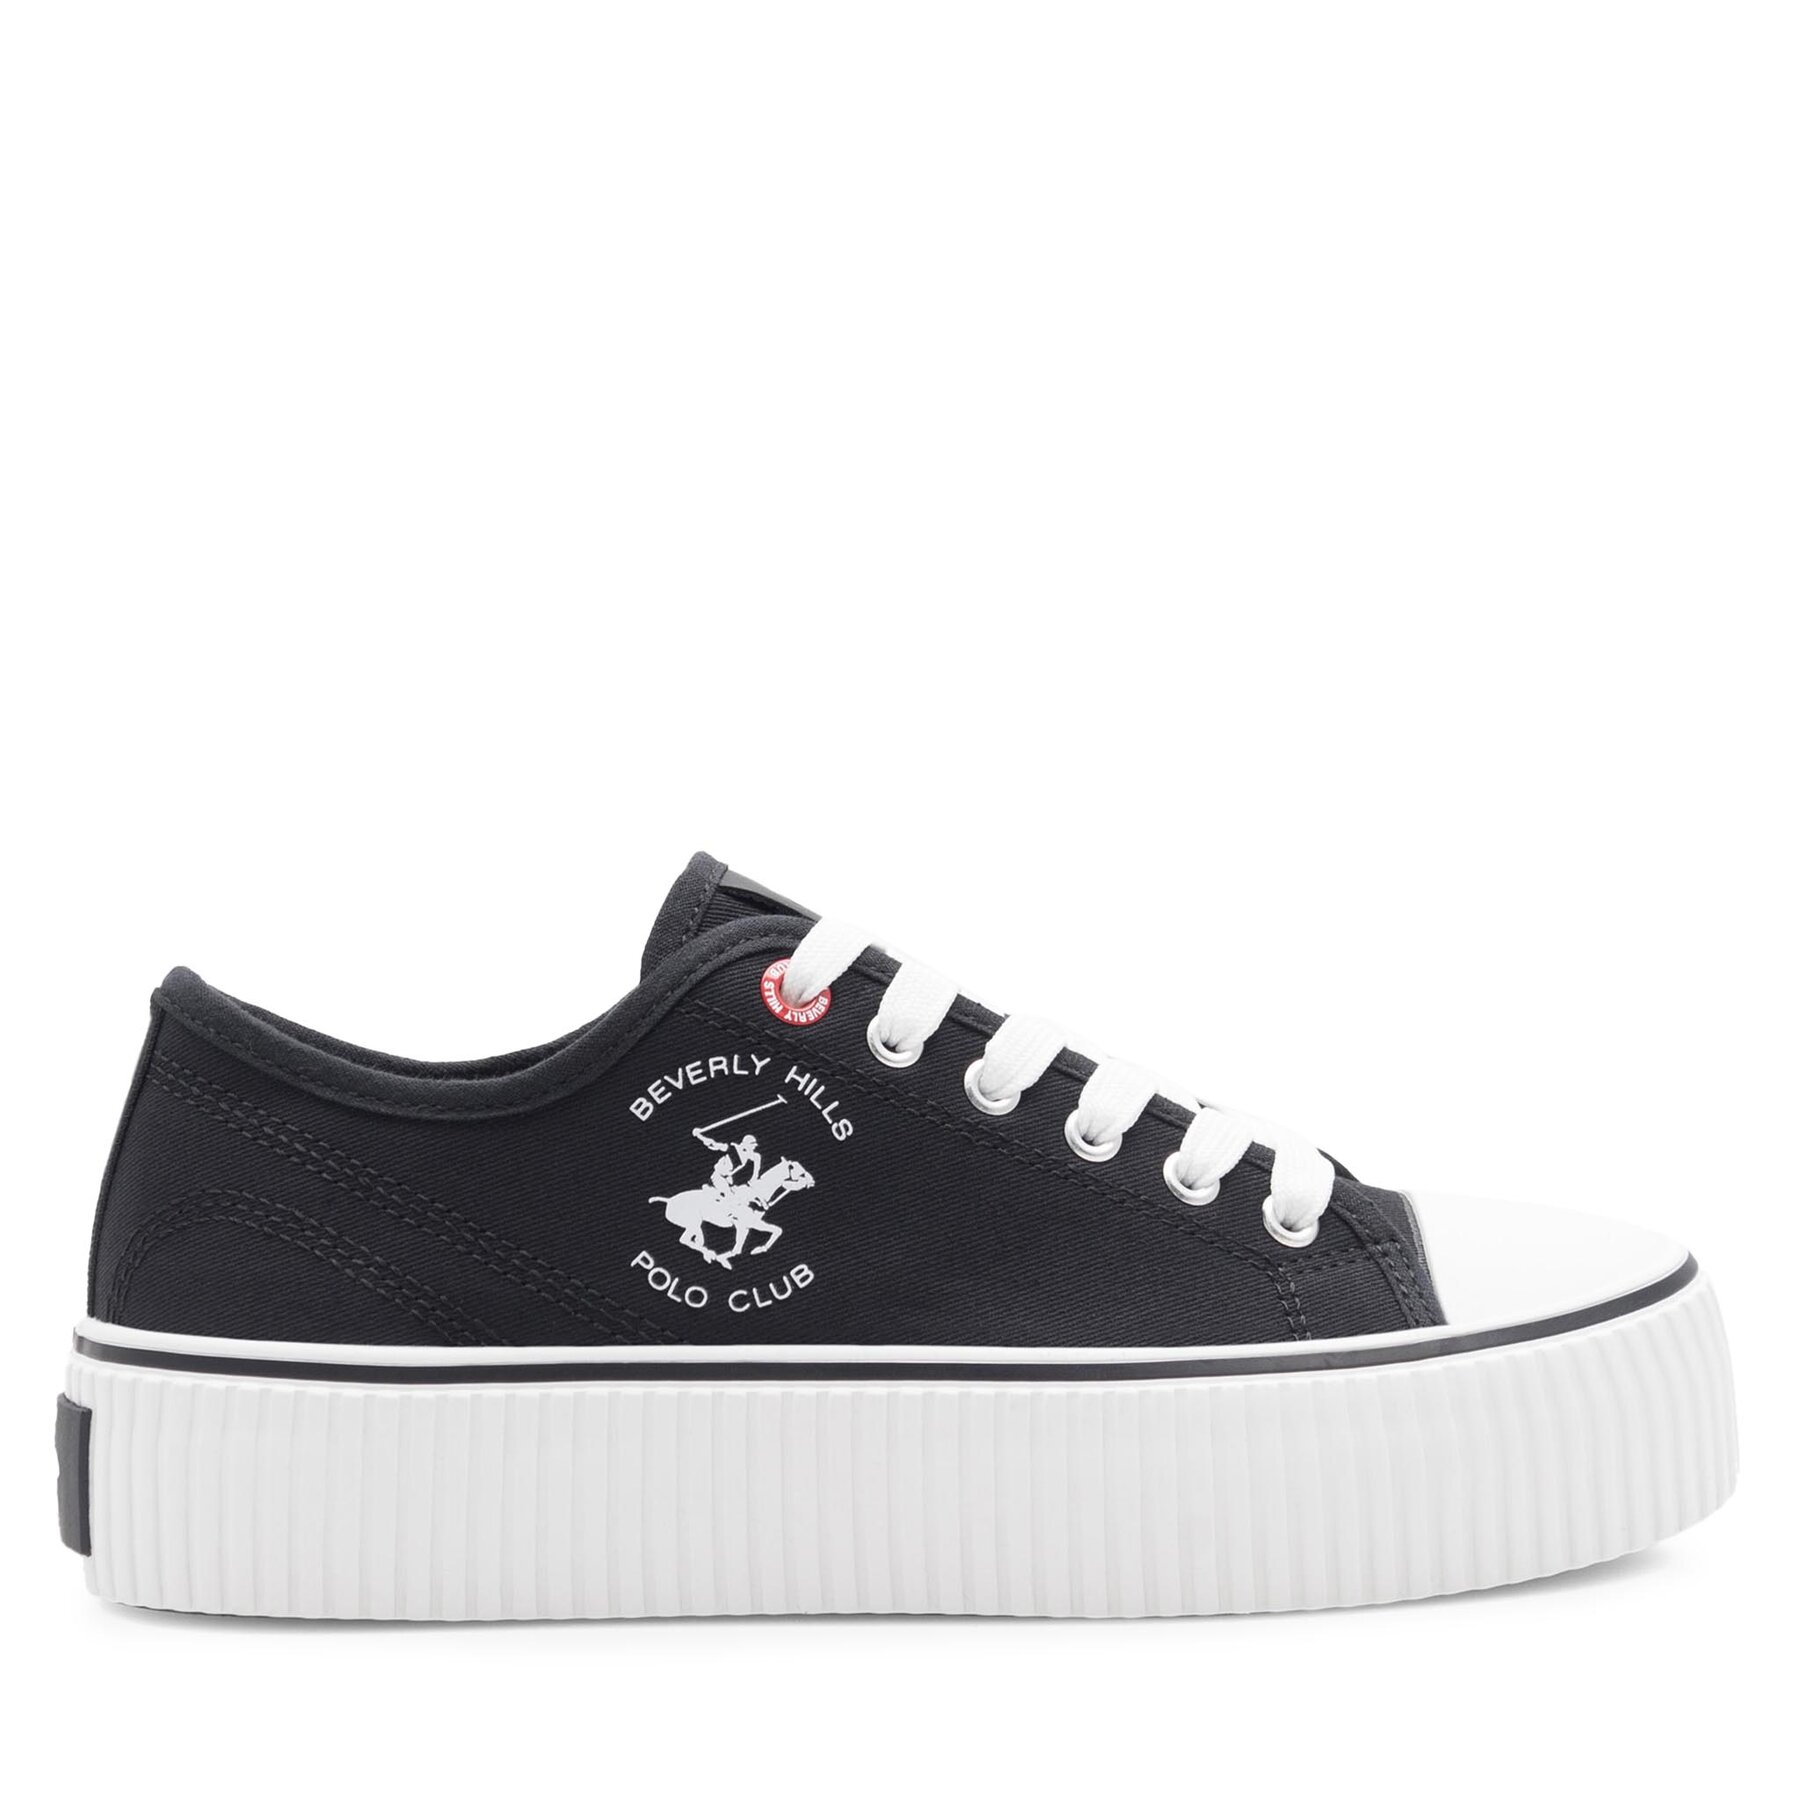 Sneakers aus Stoff Beverly Hills Polo Club BHPC027M Schwarz von Beverly Hills Polo Club